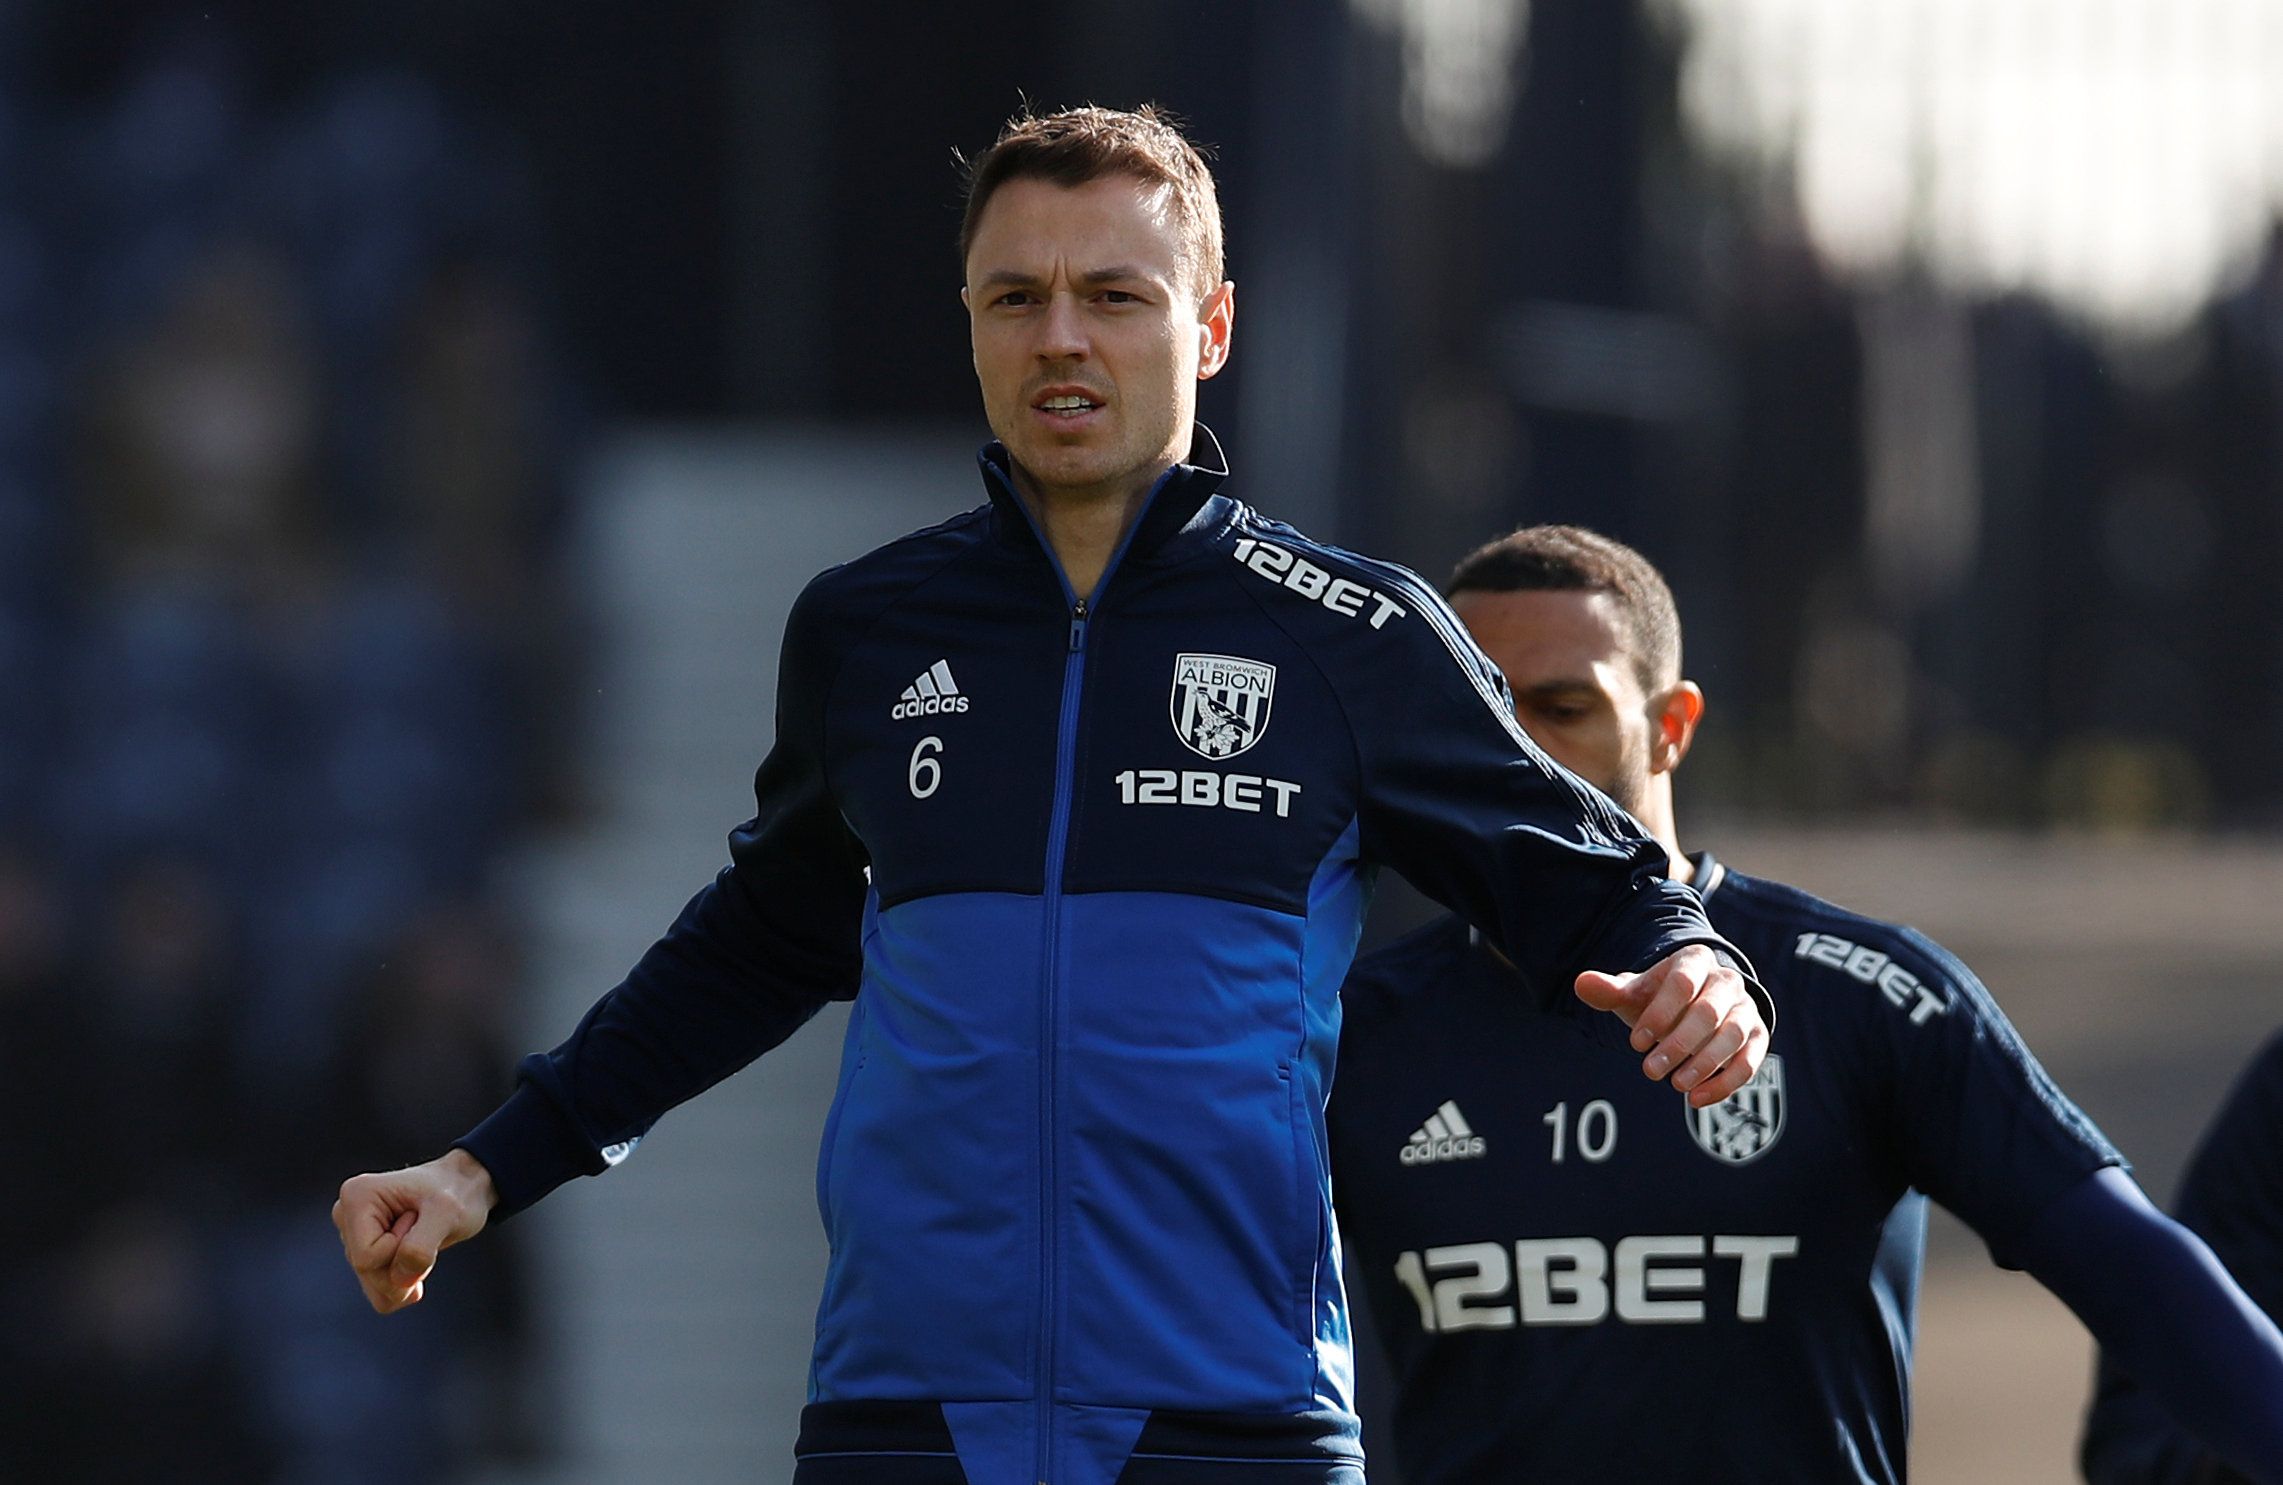 Soccer Football - Premier League - West Bromwich Albion vs Huddersfield Town - The Hawthorns, West Bromwich, Britain - February 24, 2018   West Bromwich Albion's Jonny Evans warms up before the match   Action Images via Reuters/Paul Childs    EDITORIAL USE ONLY. No use with unauthorized audio, video, data, fixture lists, club/league logos or 